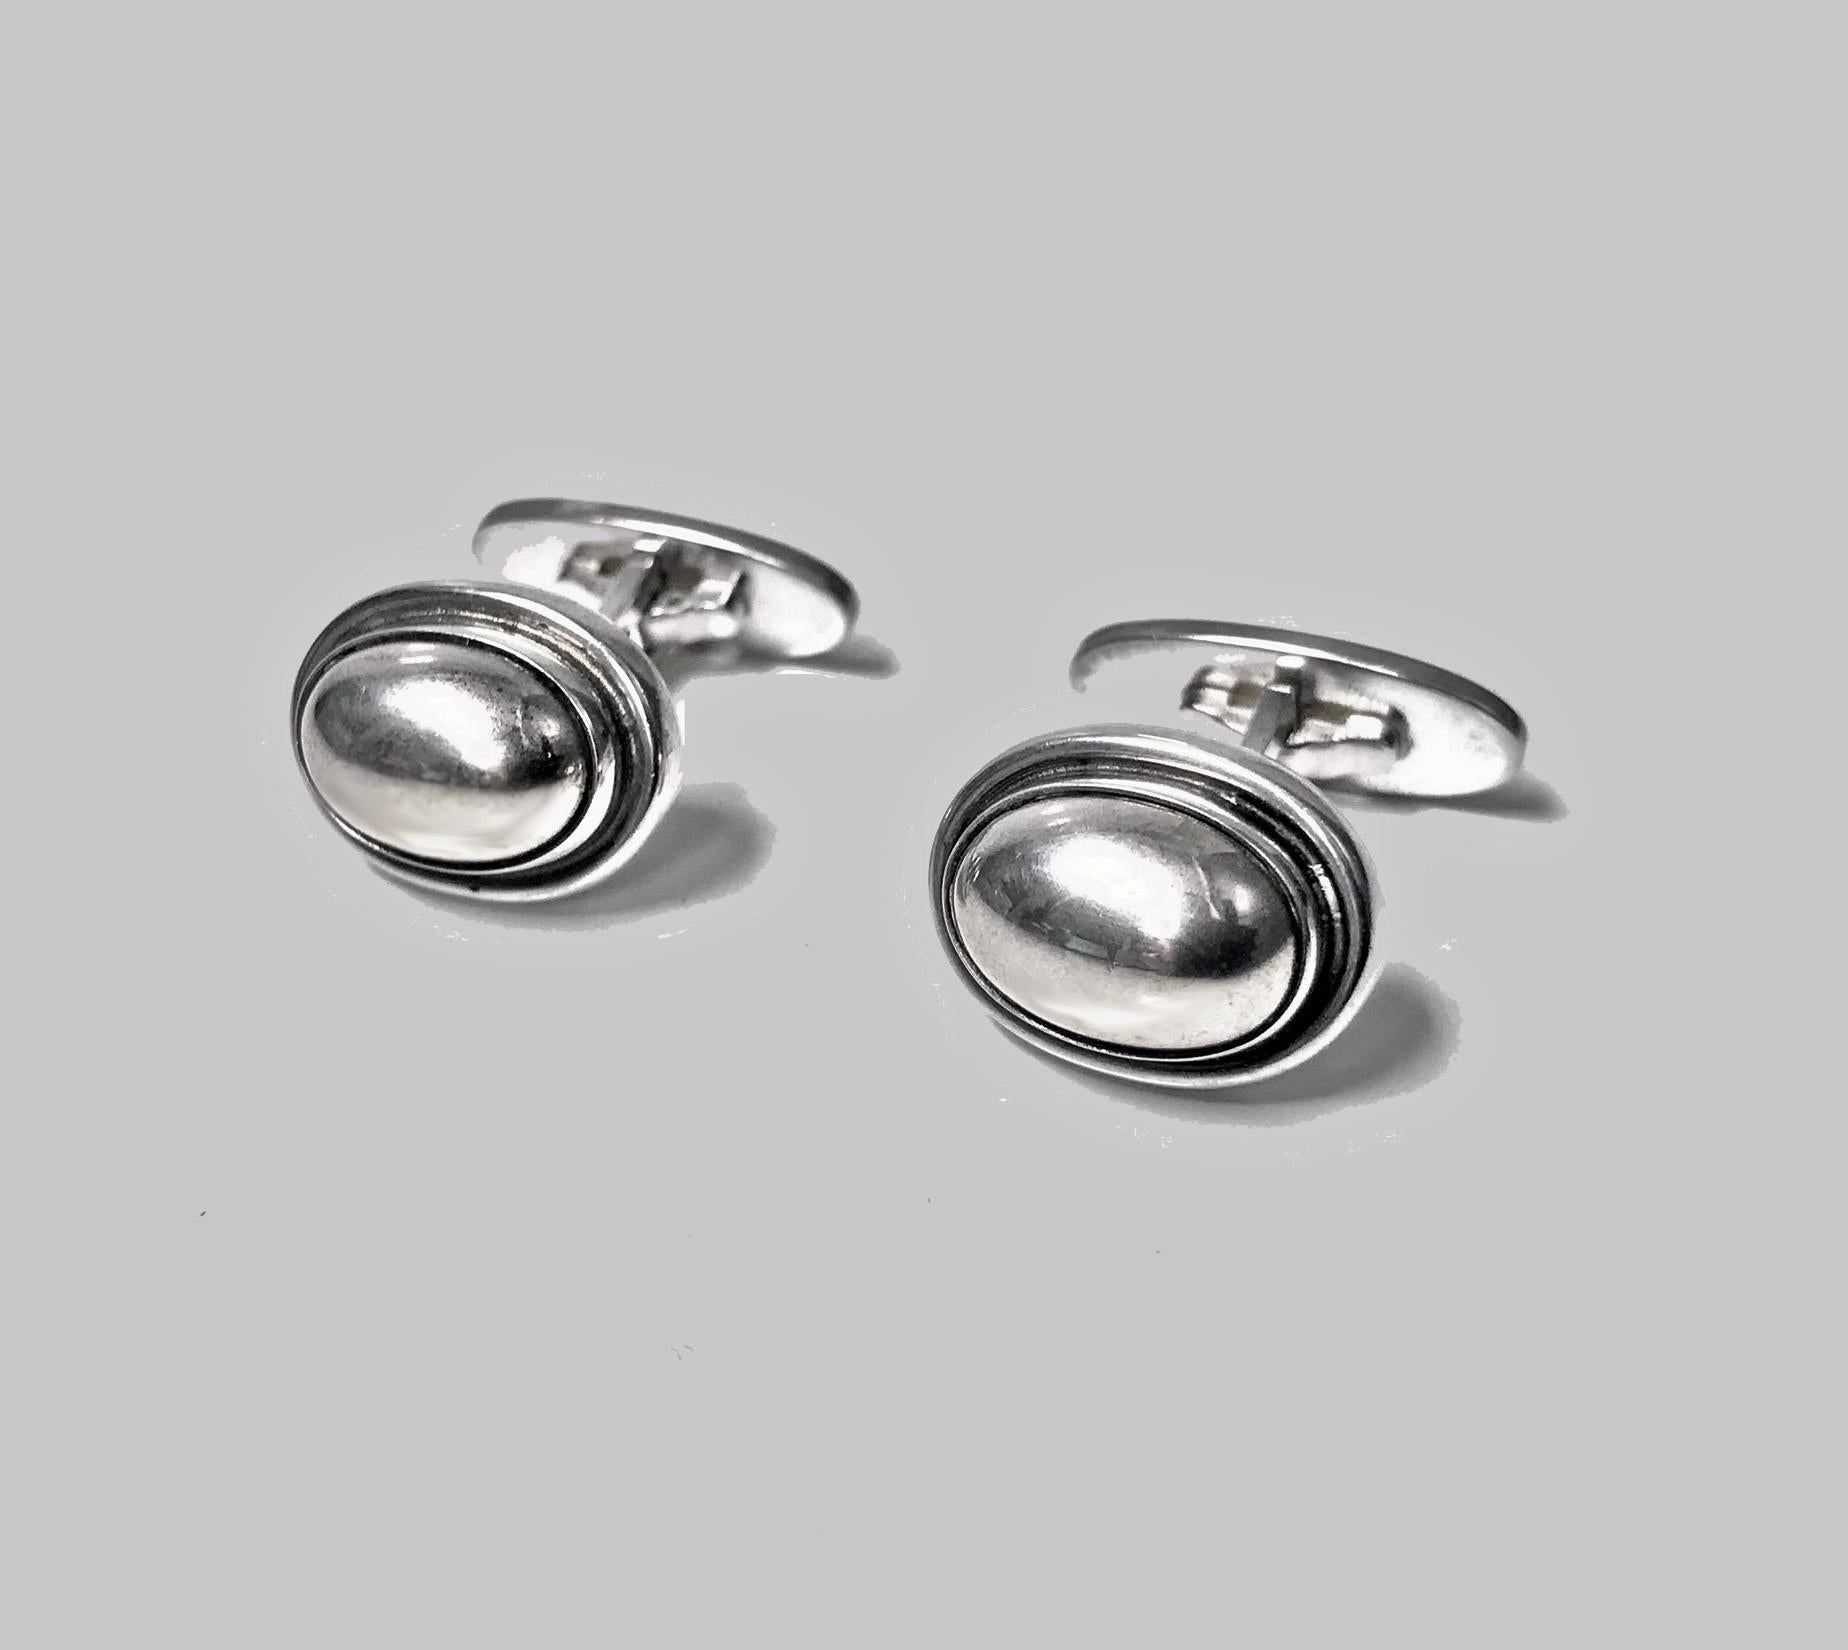 Georg Jensen oval cufflinks, #44B. Sterling oval dome cufflinks with silver bezel surround design #44B by Harald Nielsen. Size: 16.70 x 12.70 mm. Total item weight: 13.90 gm.